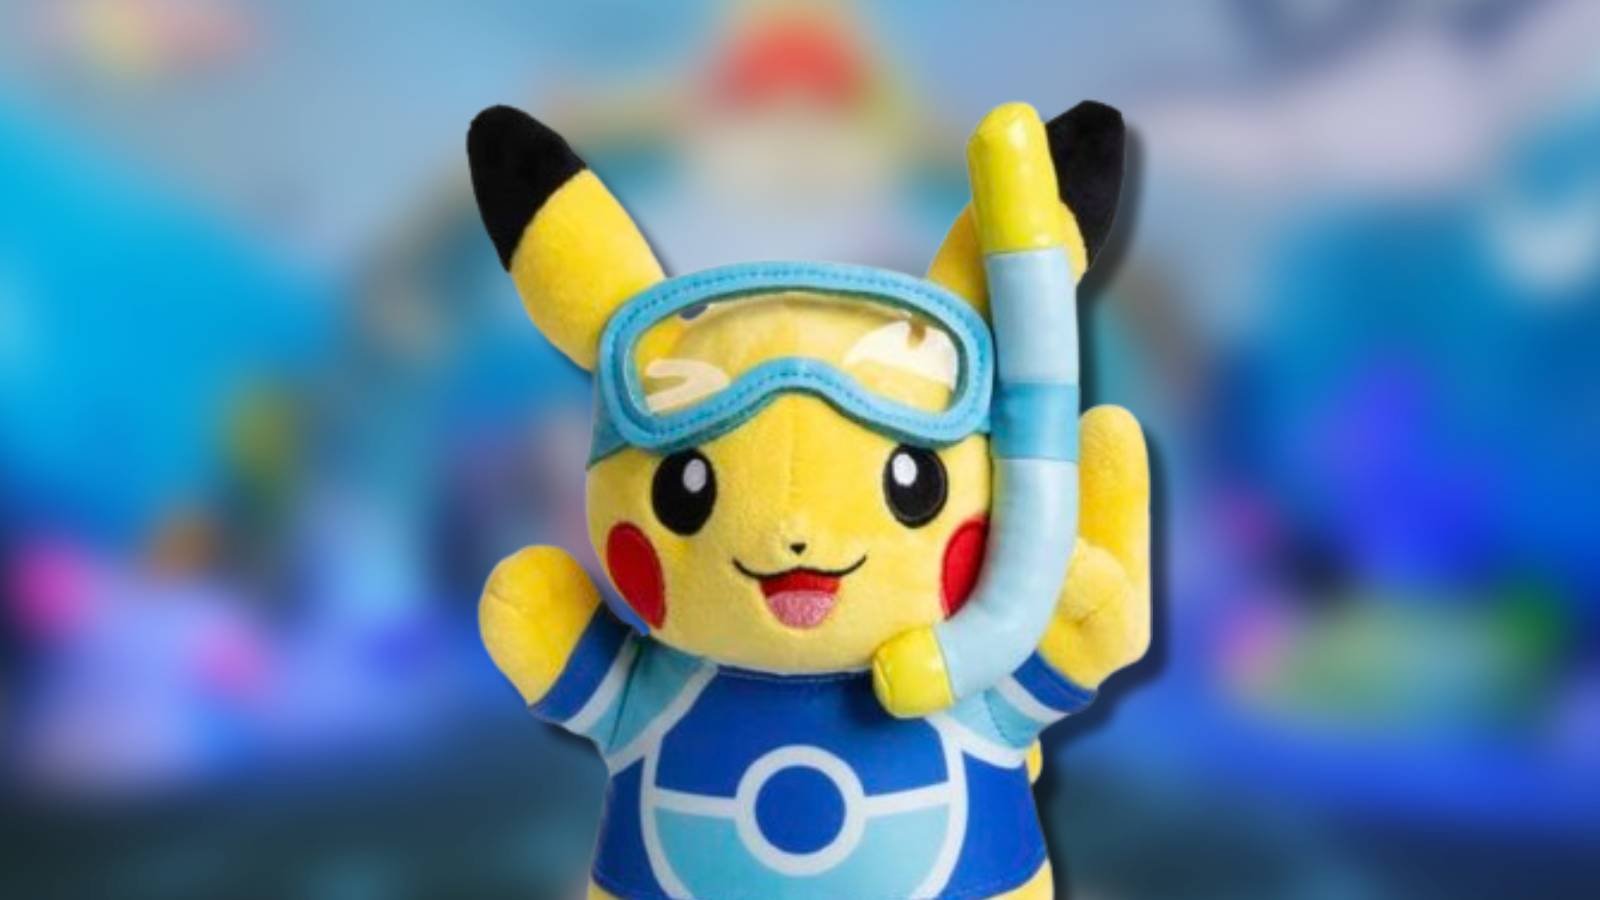 A Pikachu plush is visible against a blurred background